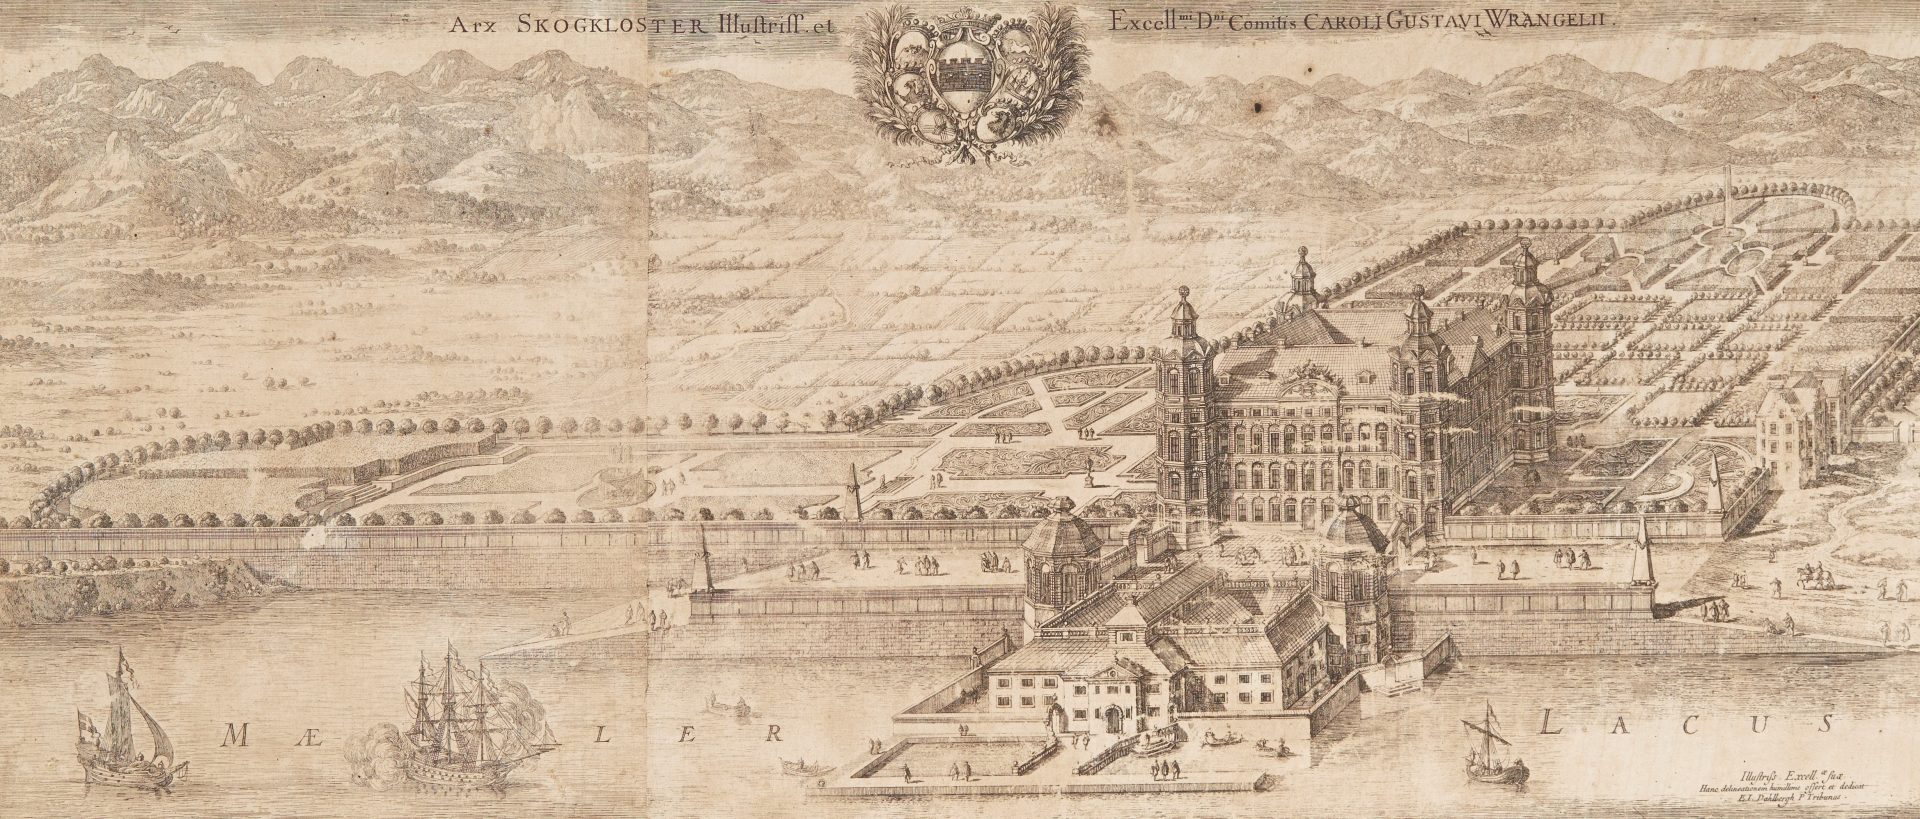 An etching of the castle with its park.